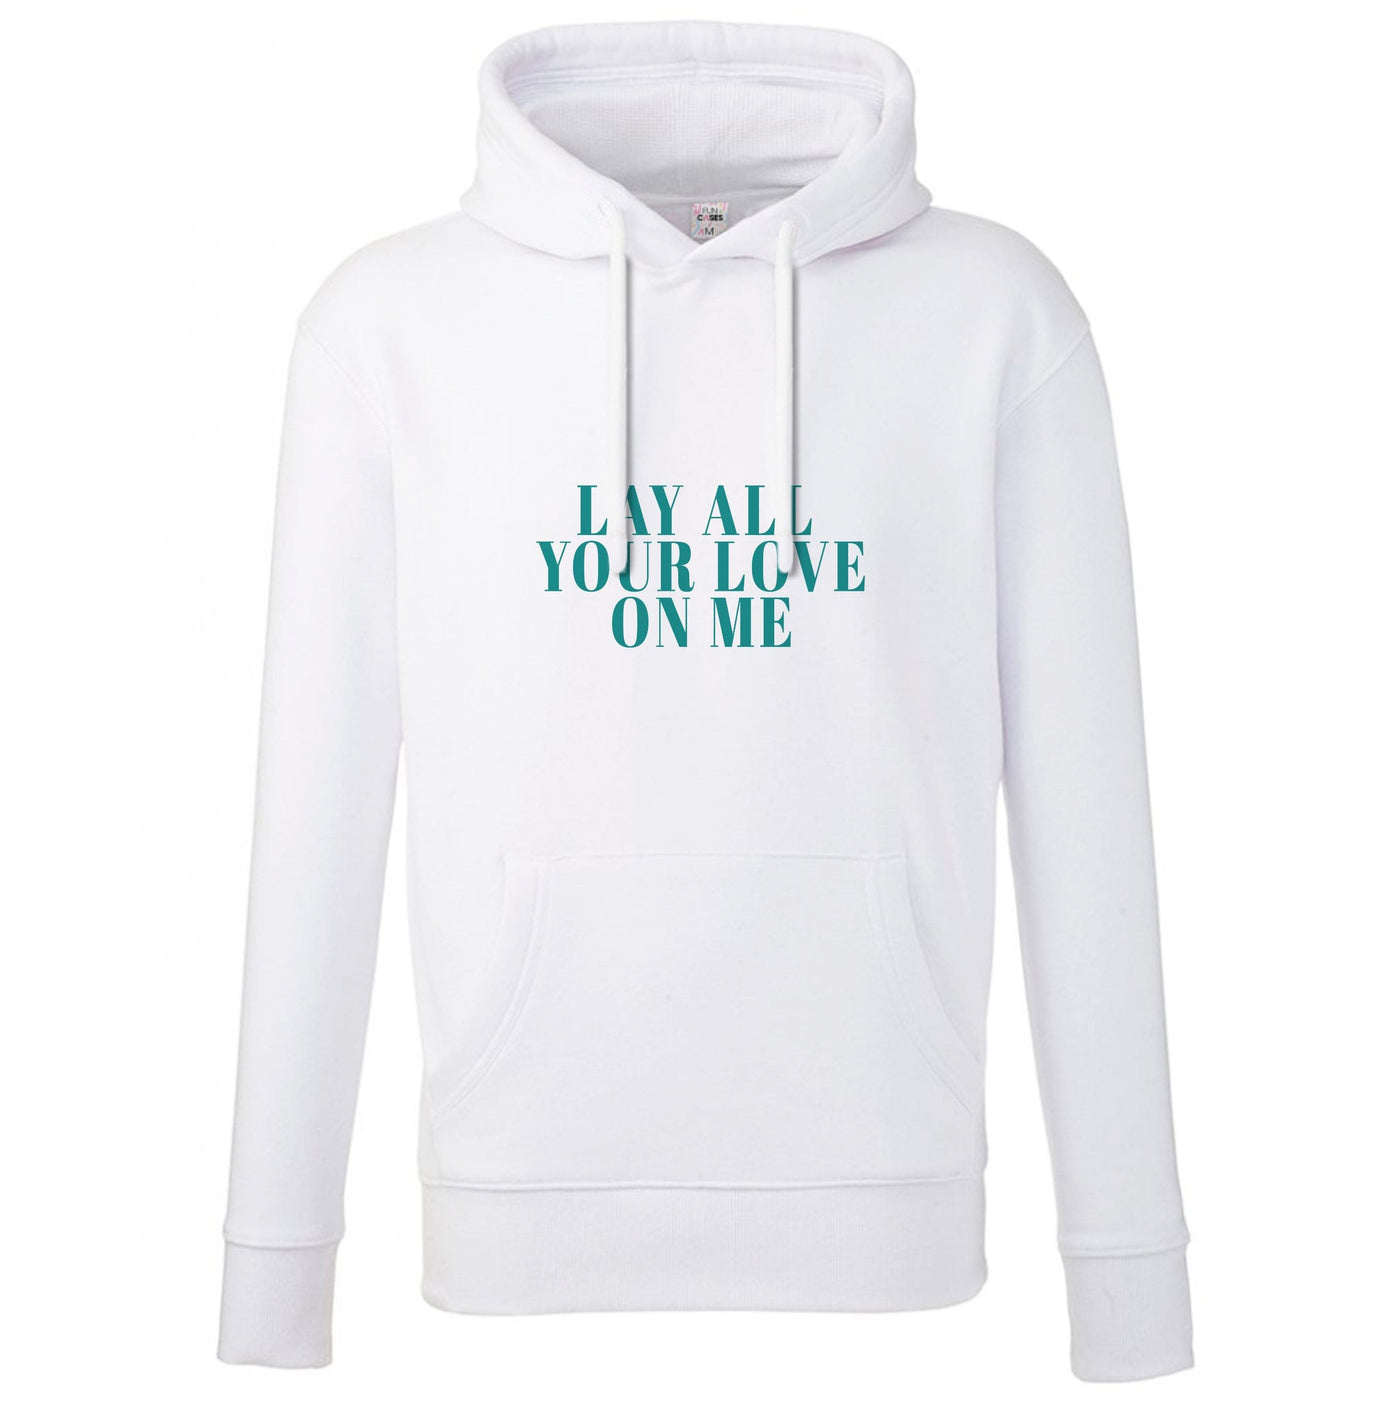 Lay All Your Love On Me - Mamma Mia Hoodie